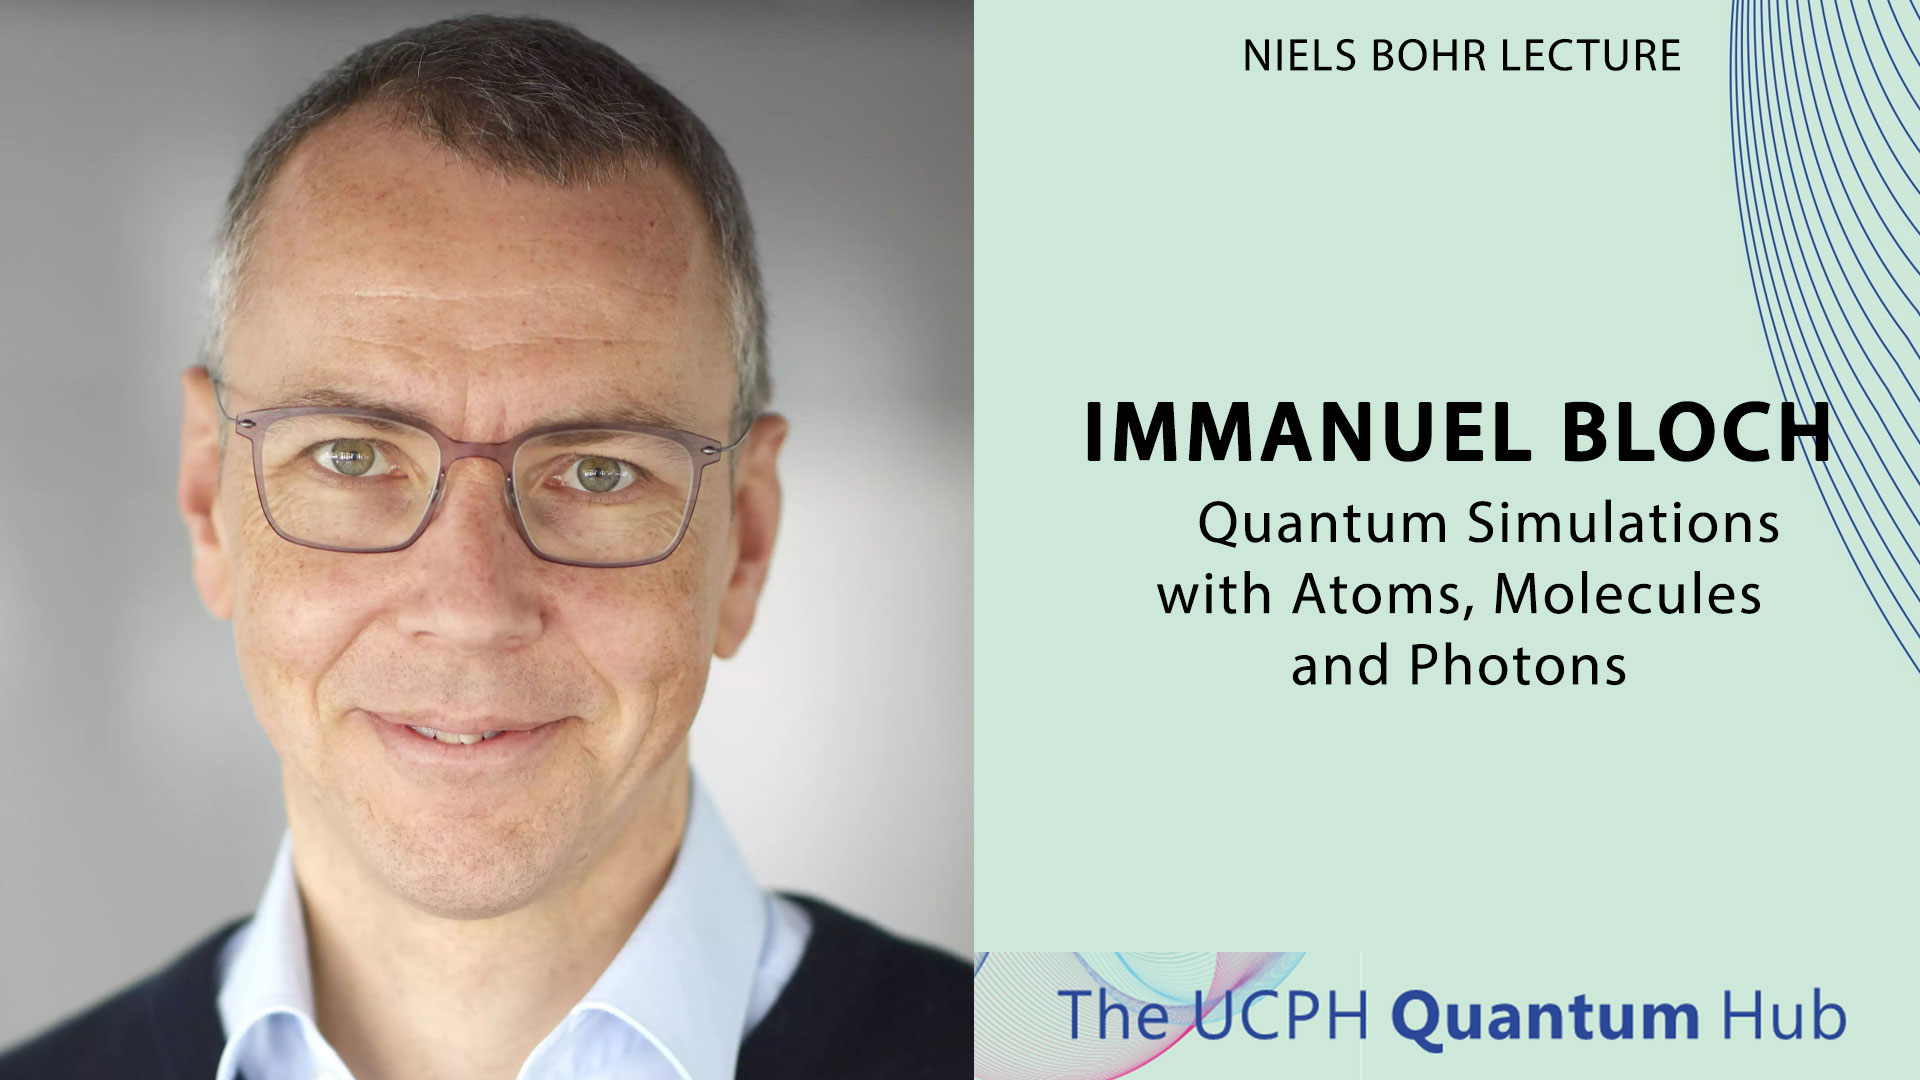 Niels Bohr Lecture by Prof. Immanuel Bloch